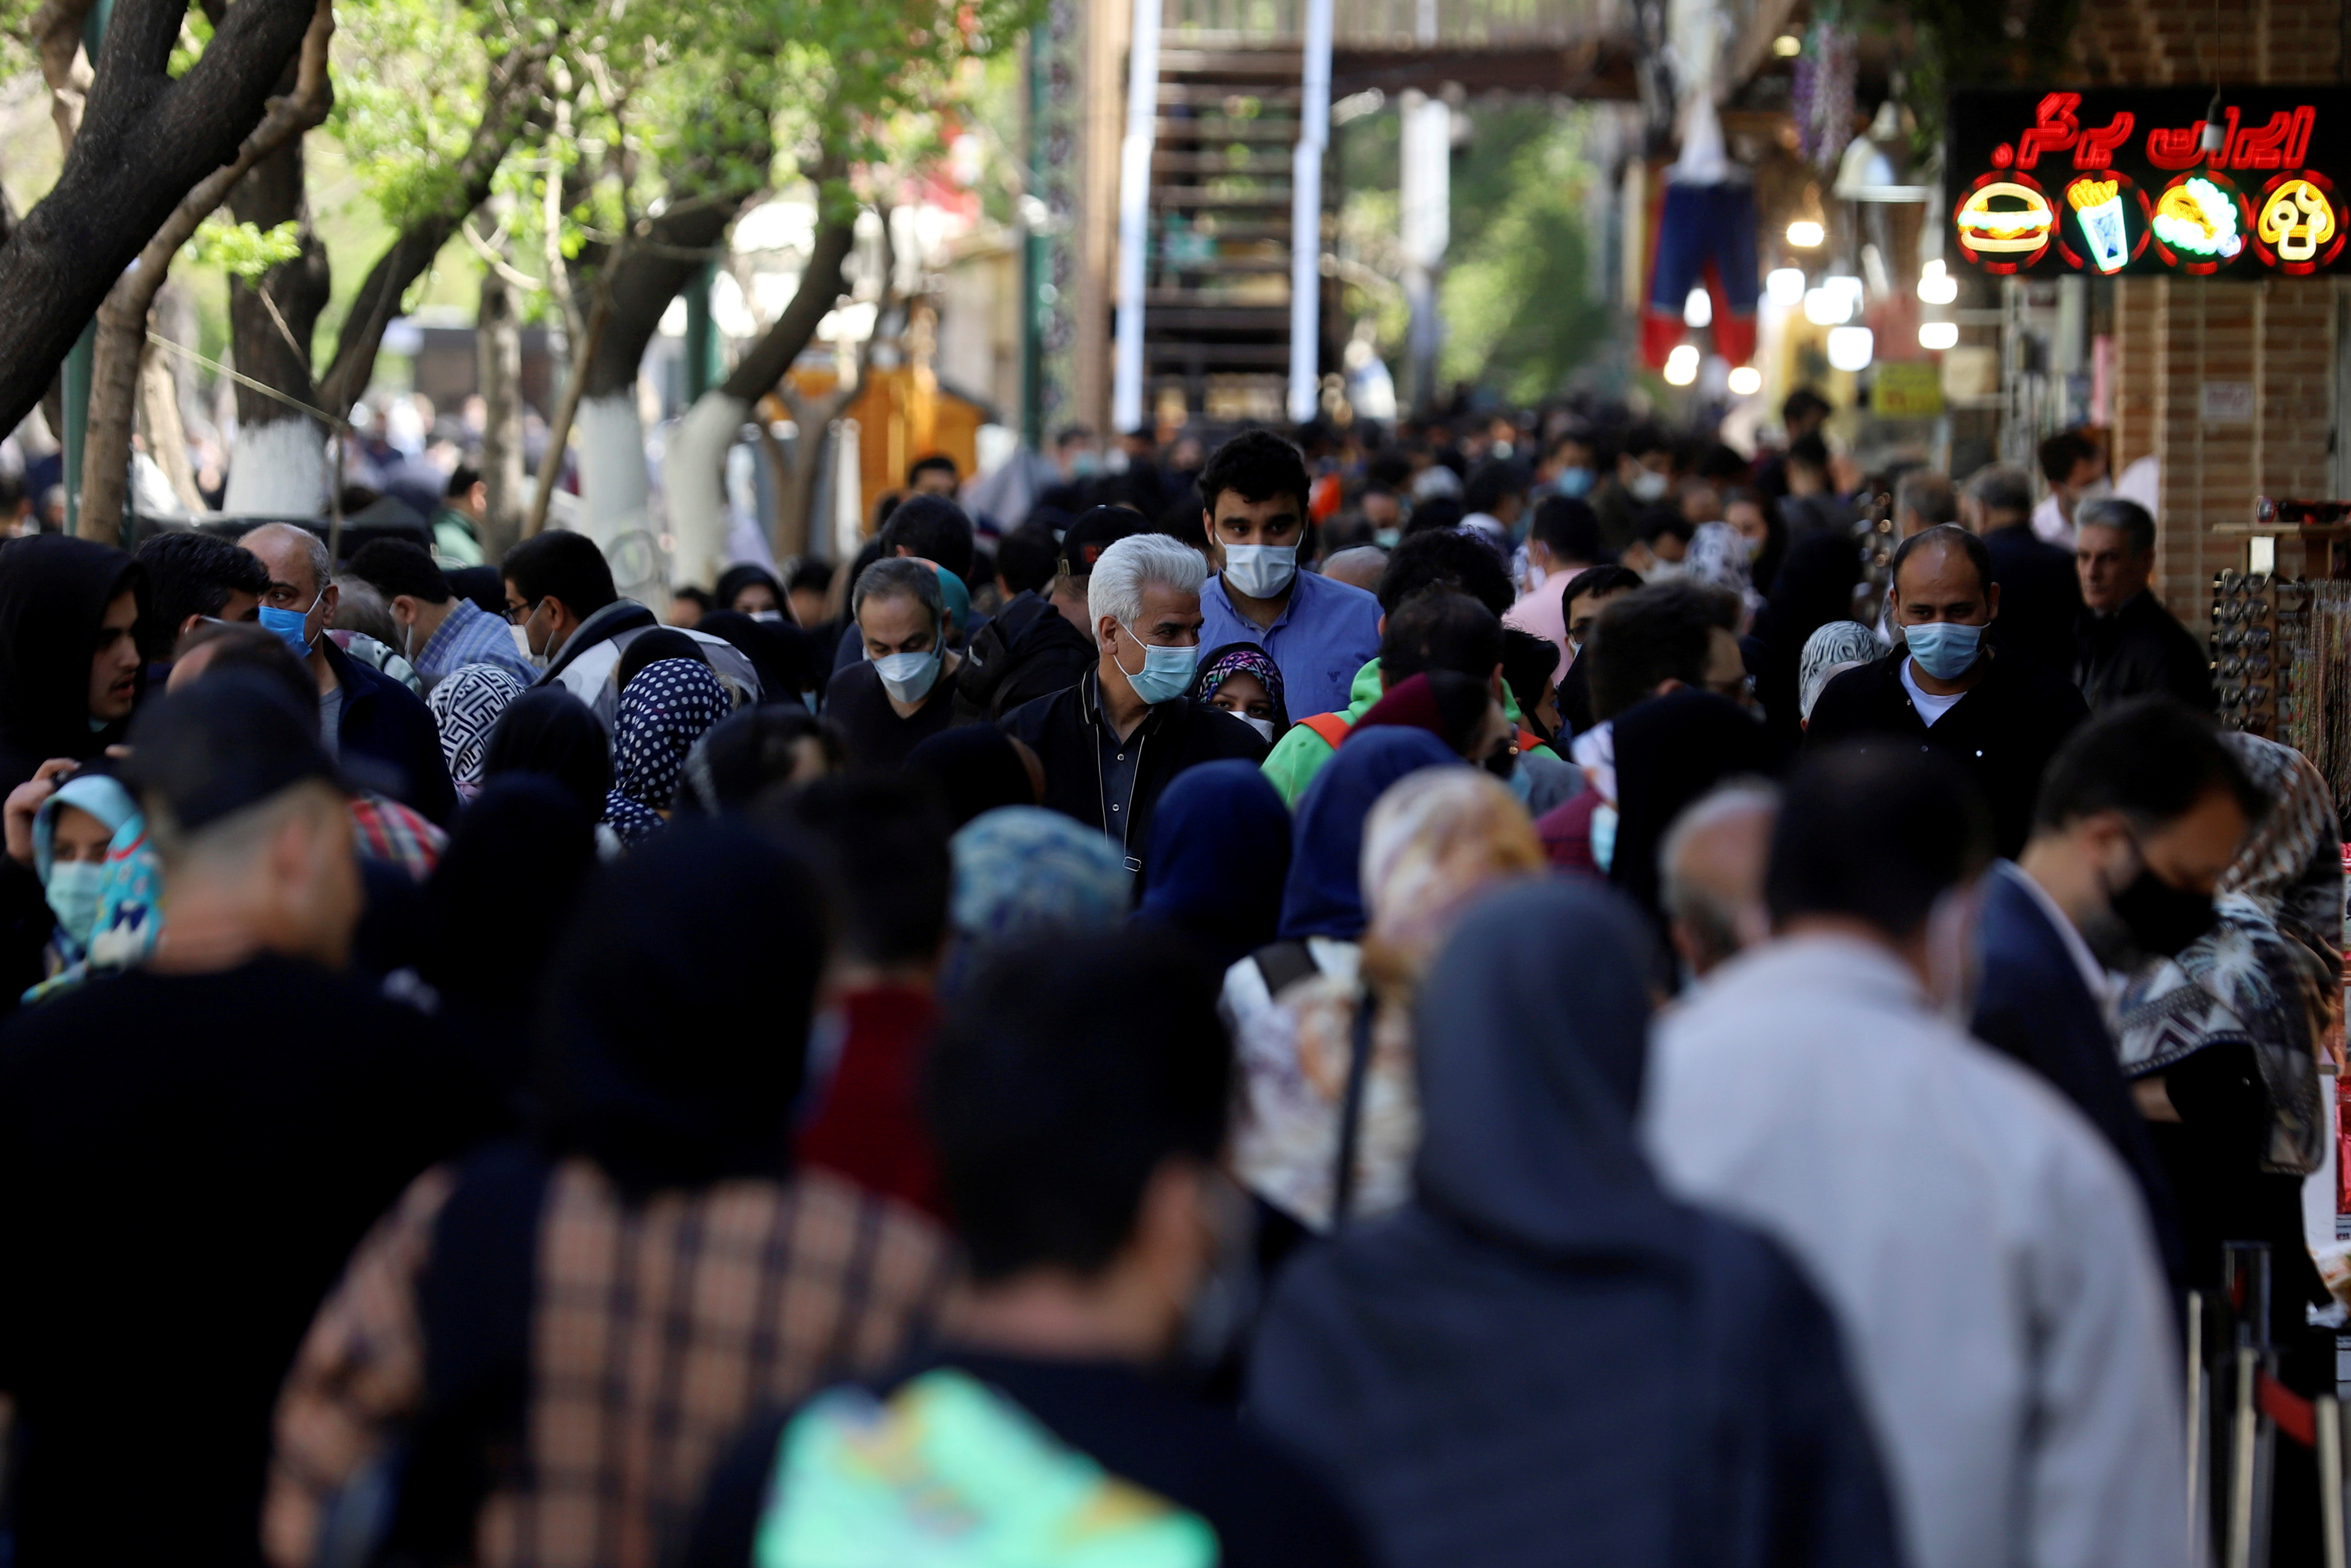 Iranians wearing protective face masks against the coronavirus walk in a crowded area of the capital Tehran, Iran